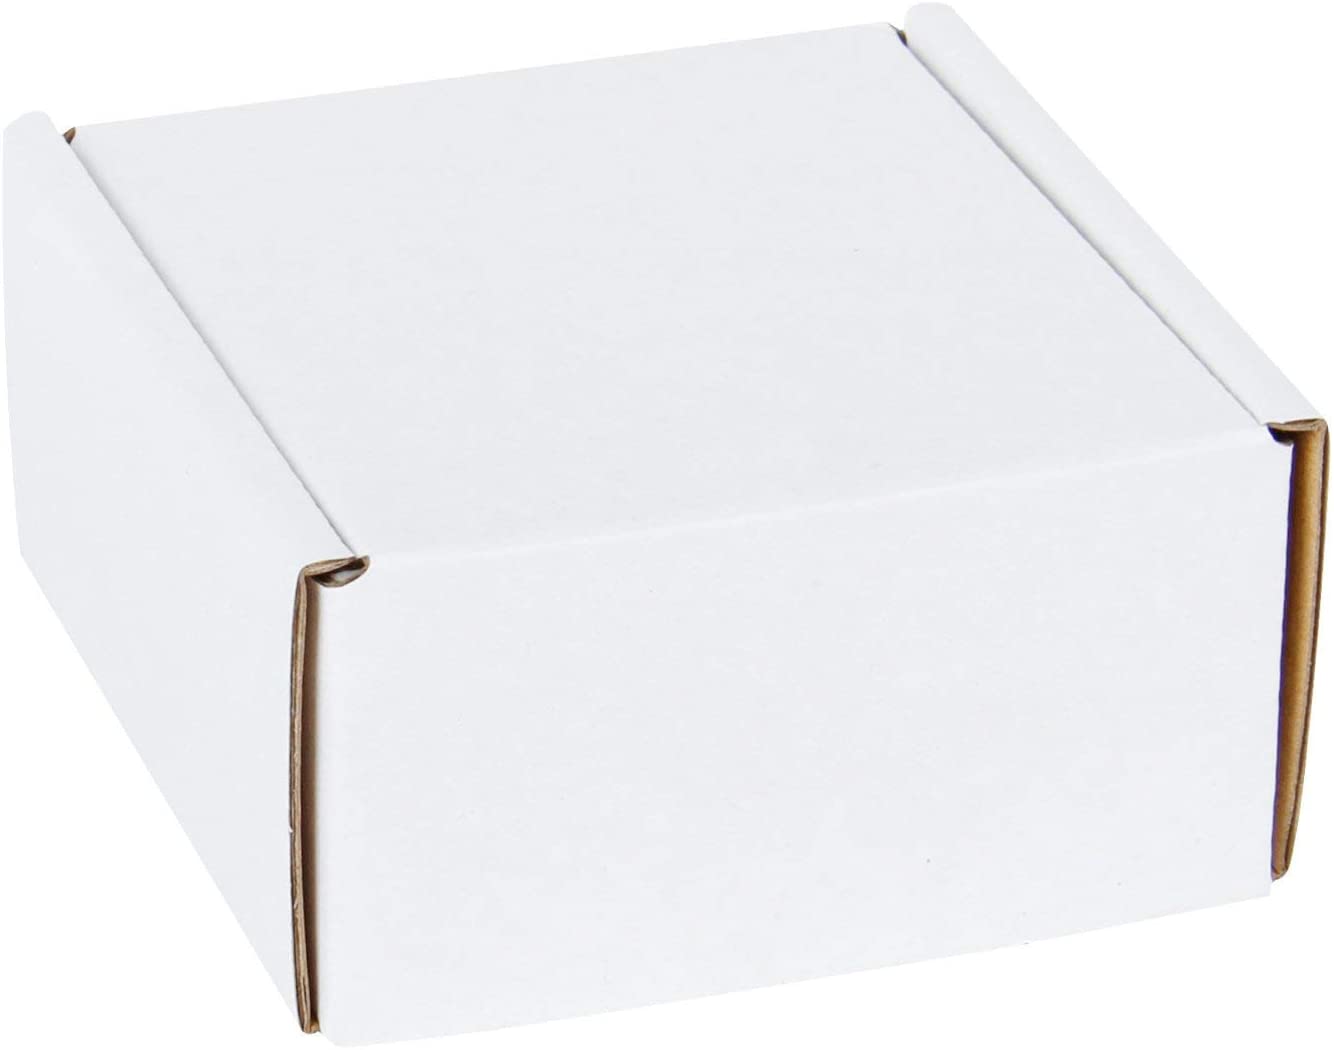 WRAPLA Recyclable Corrugated Box Mailers - Cardboard Box Shipping Small - 10 X 10 X 5 CM - 50 Pack - Oyster White